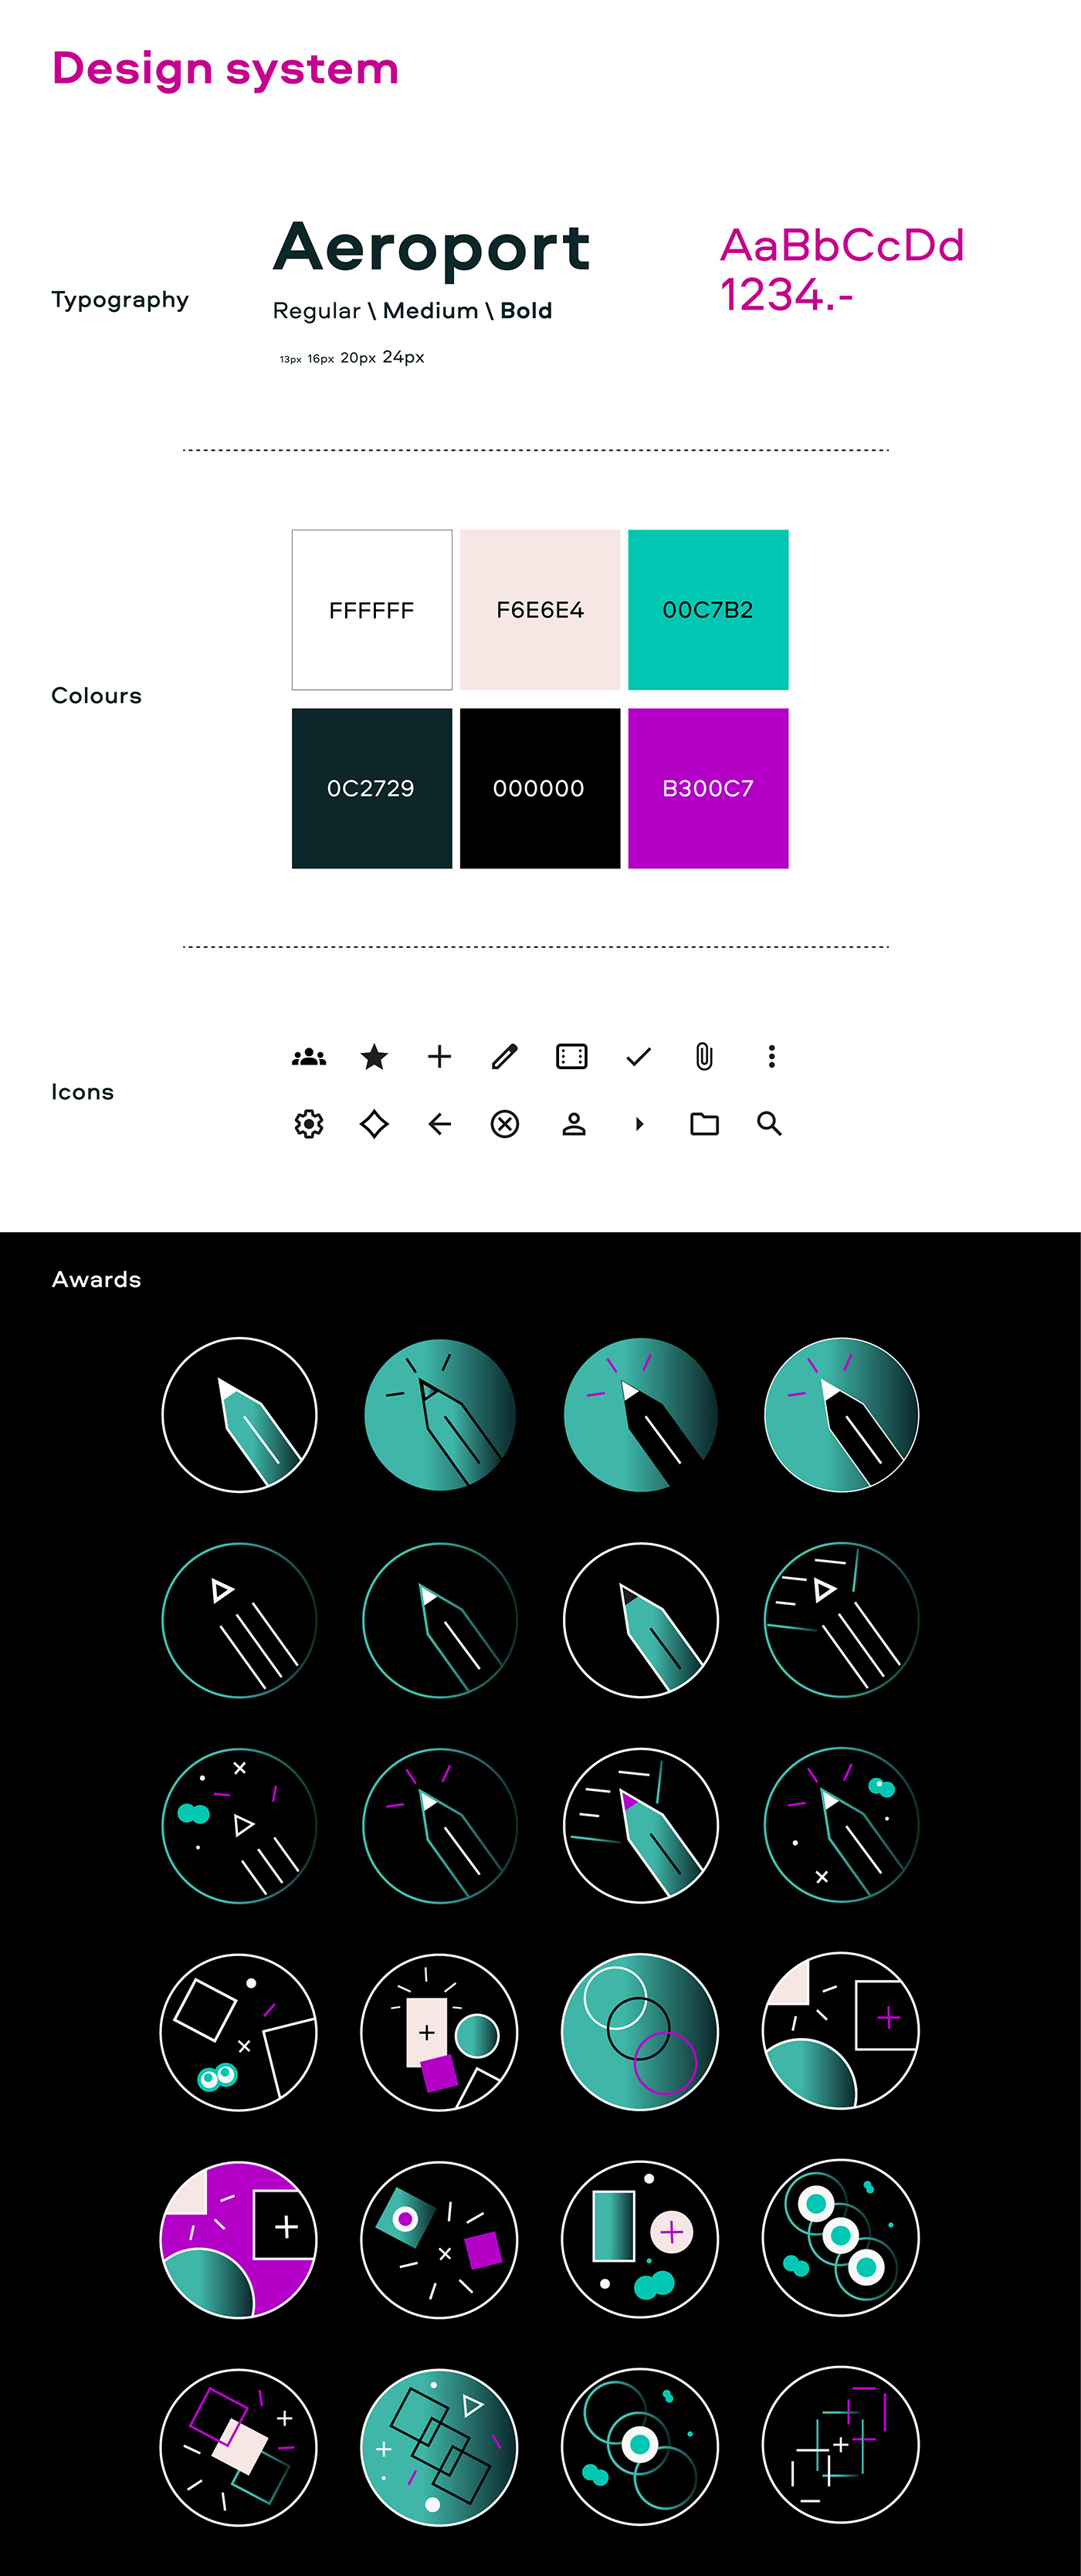 Figma graphic design  infographic Mobile app product design  prototype research UI user interface ux